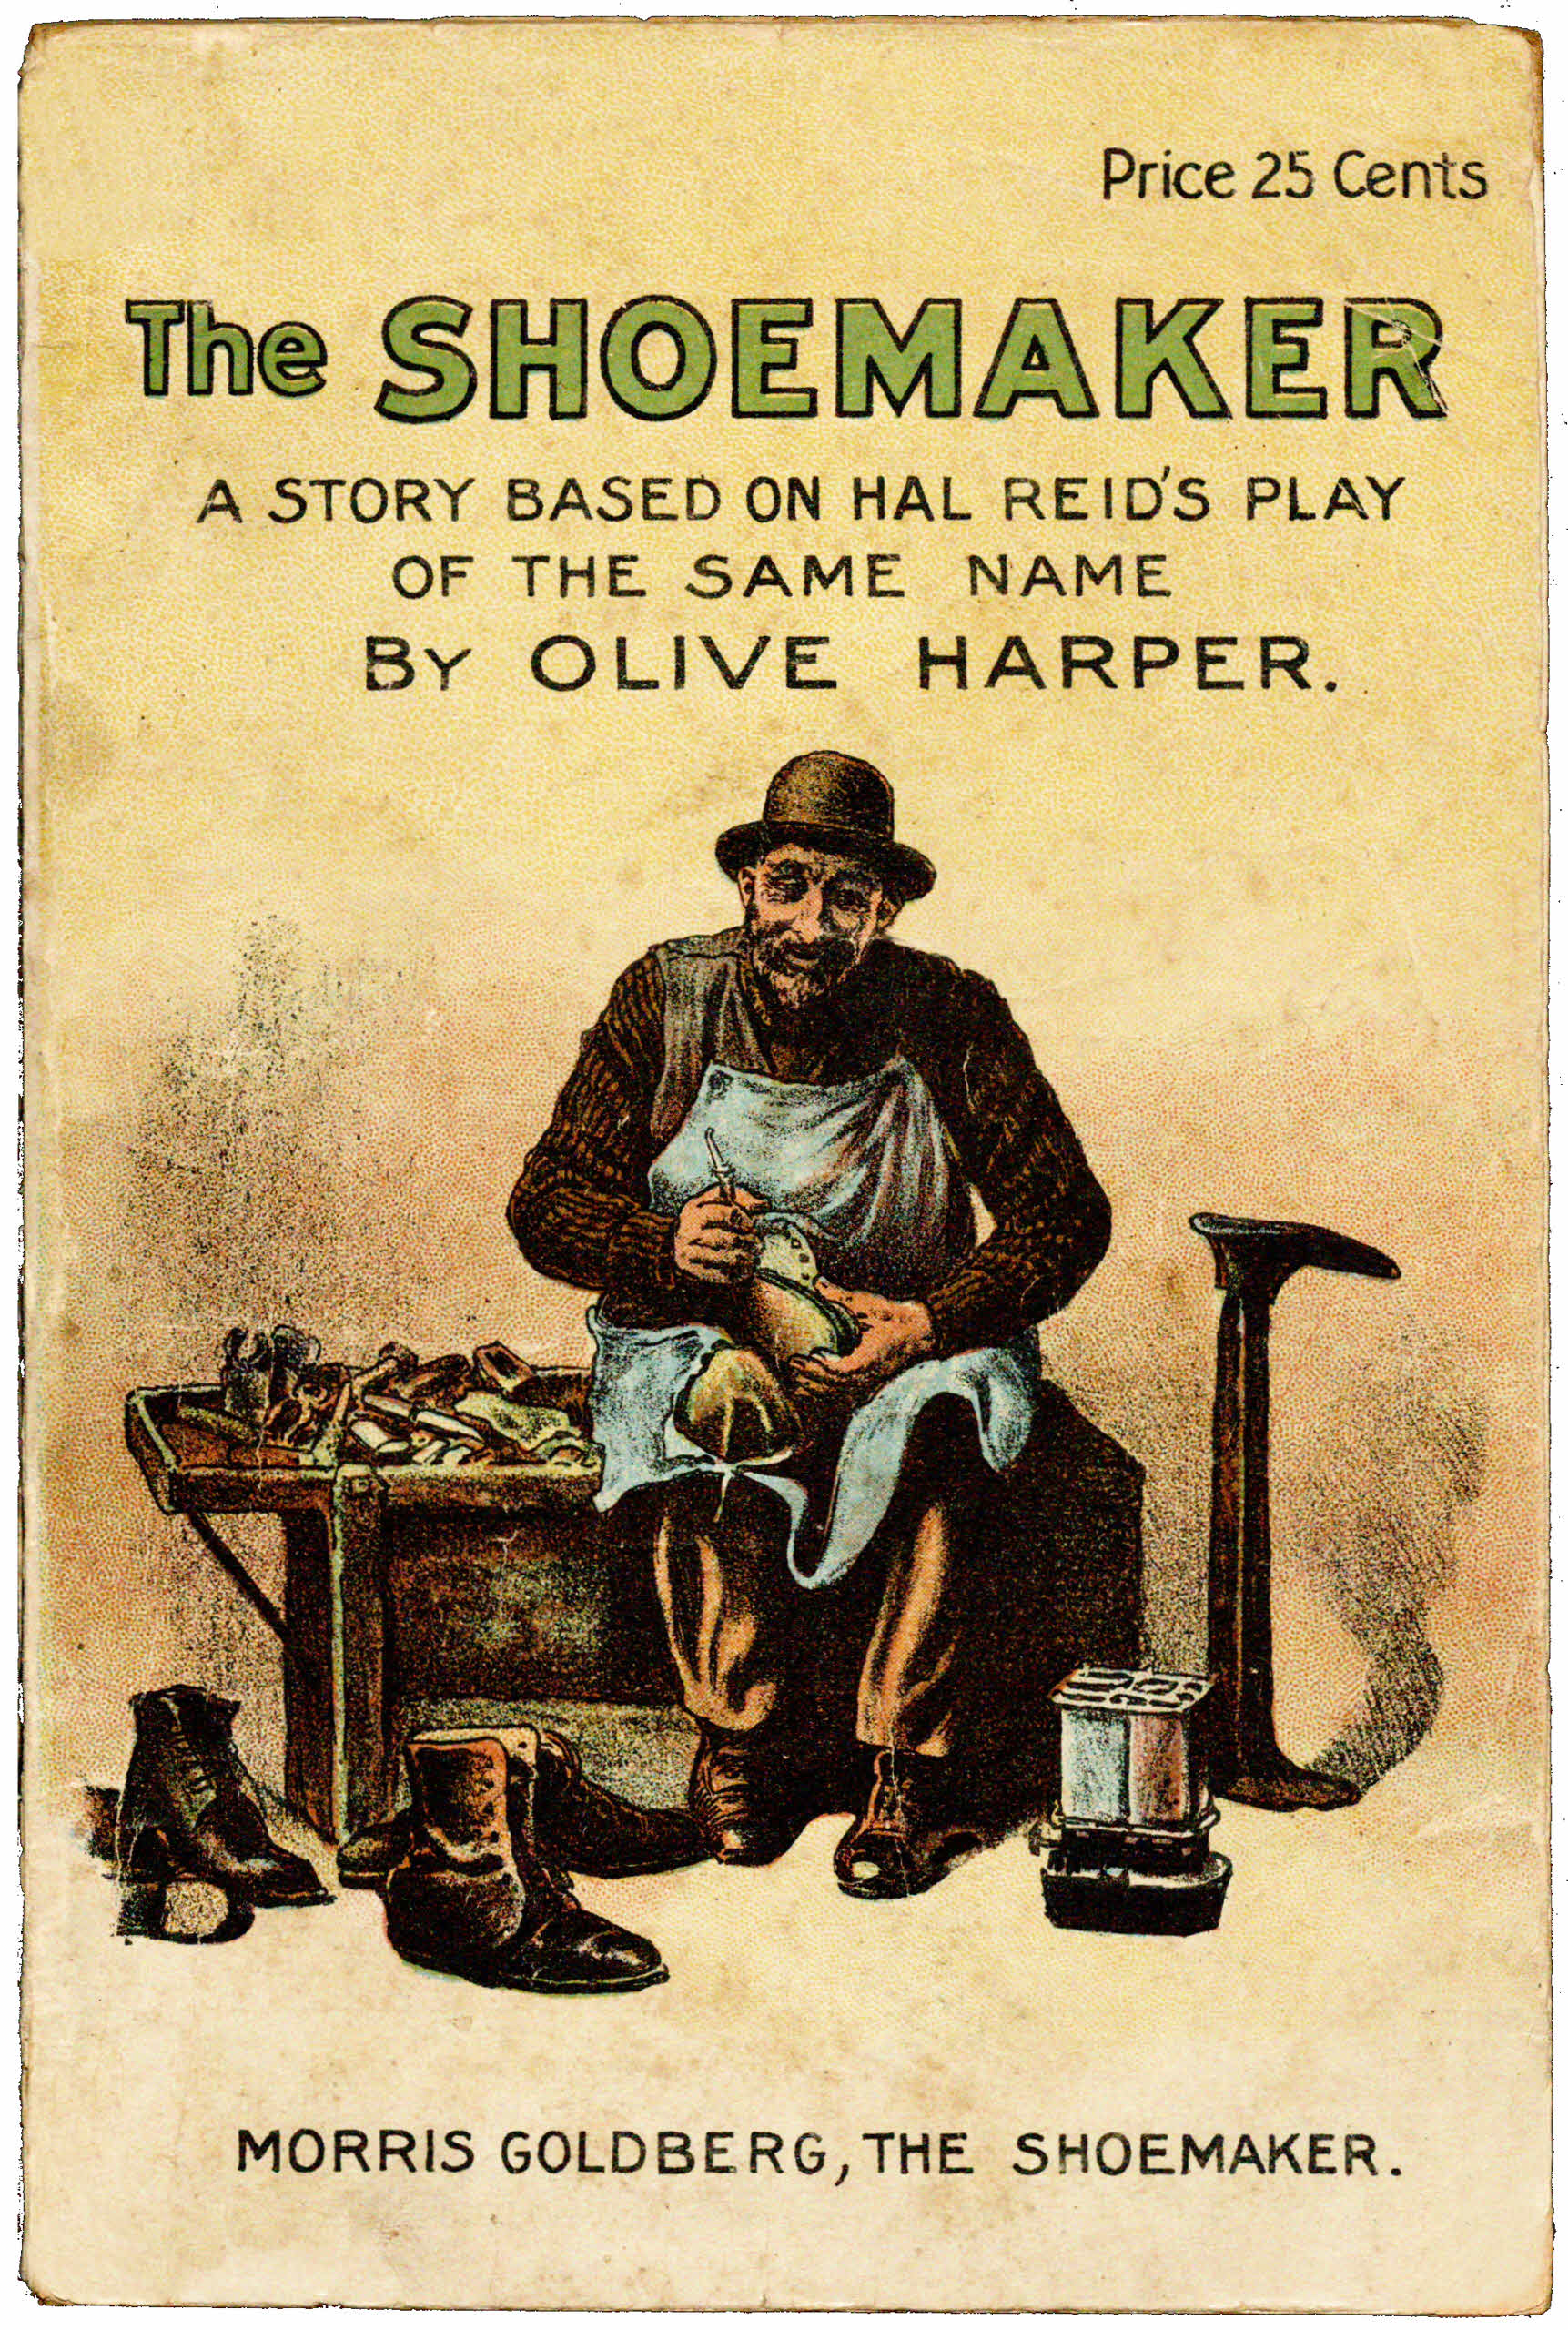 The Shoemaker, by Olive Harper—A Project Gutenberg eBook